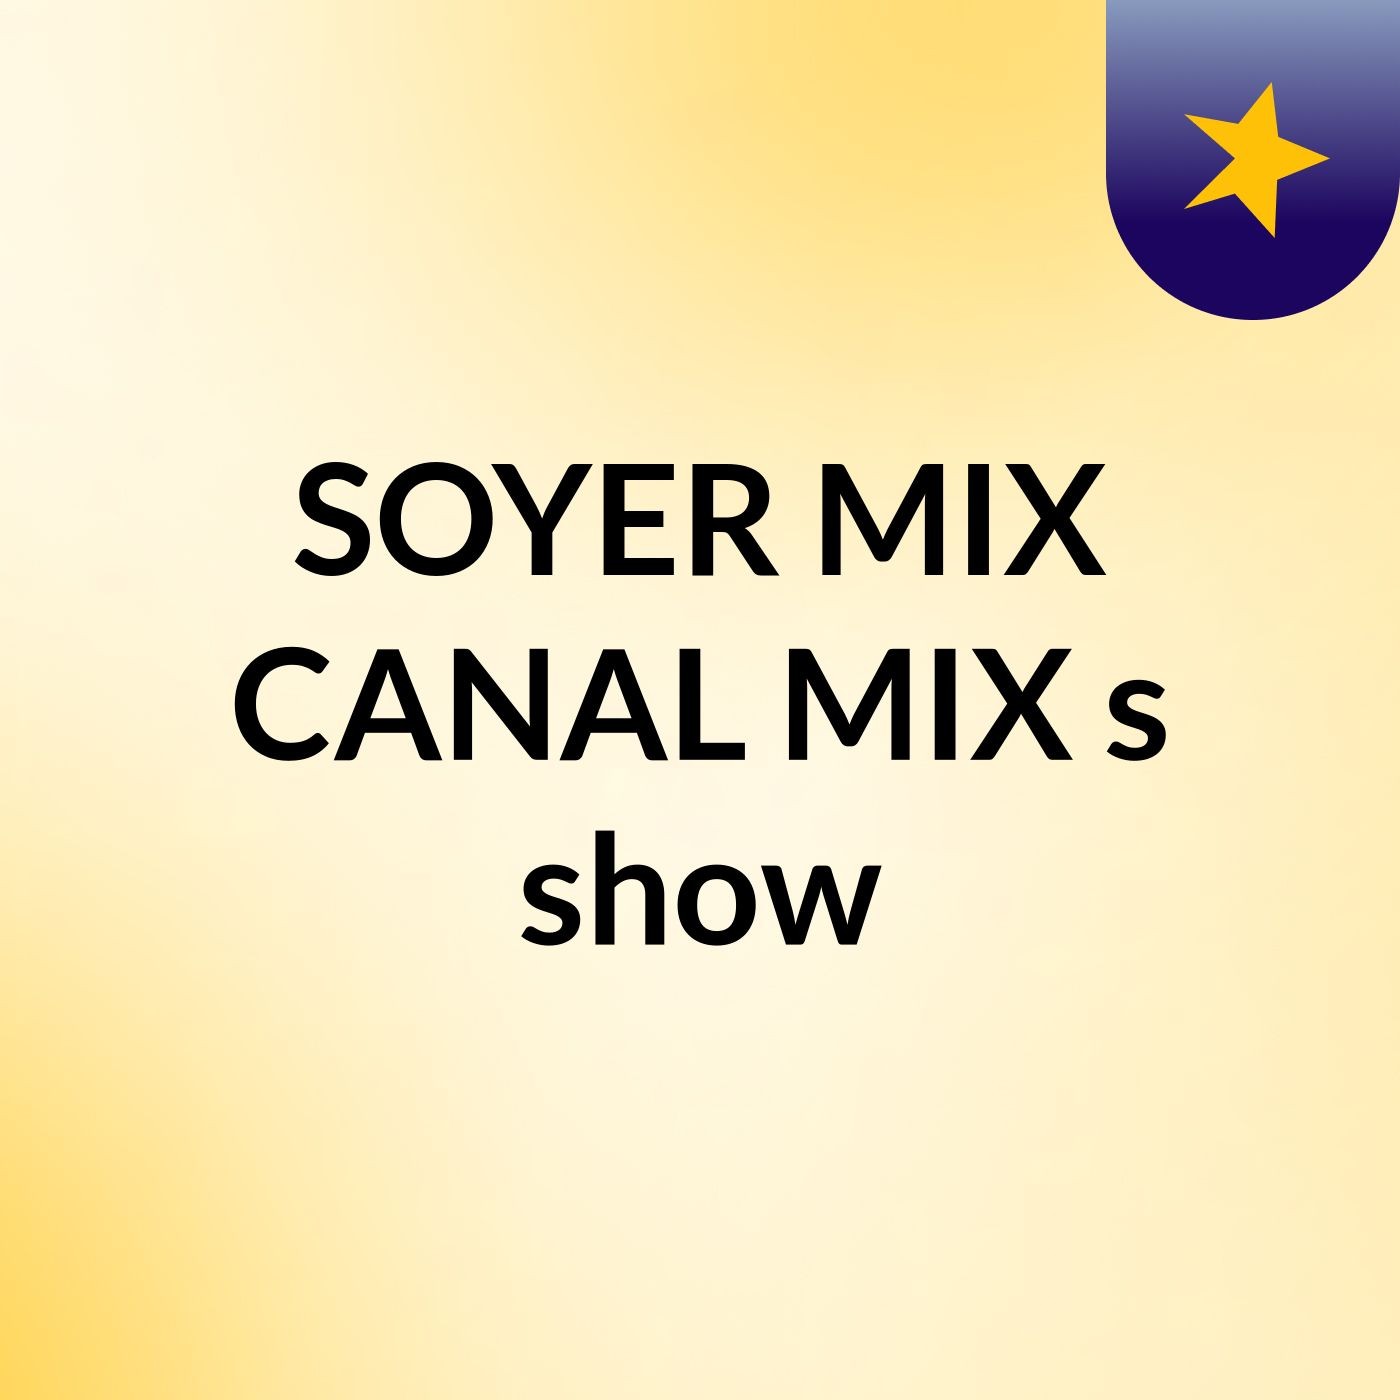 SOYER MIX CANAL MIX's show